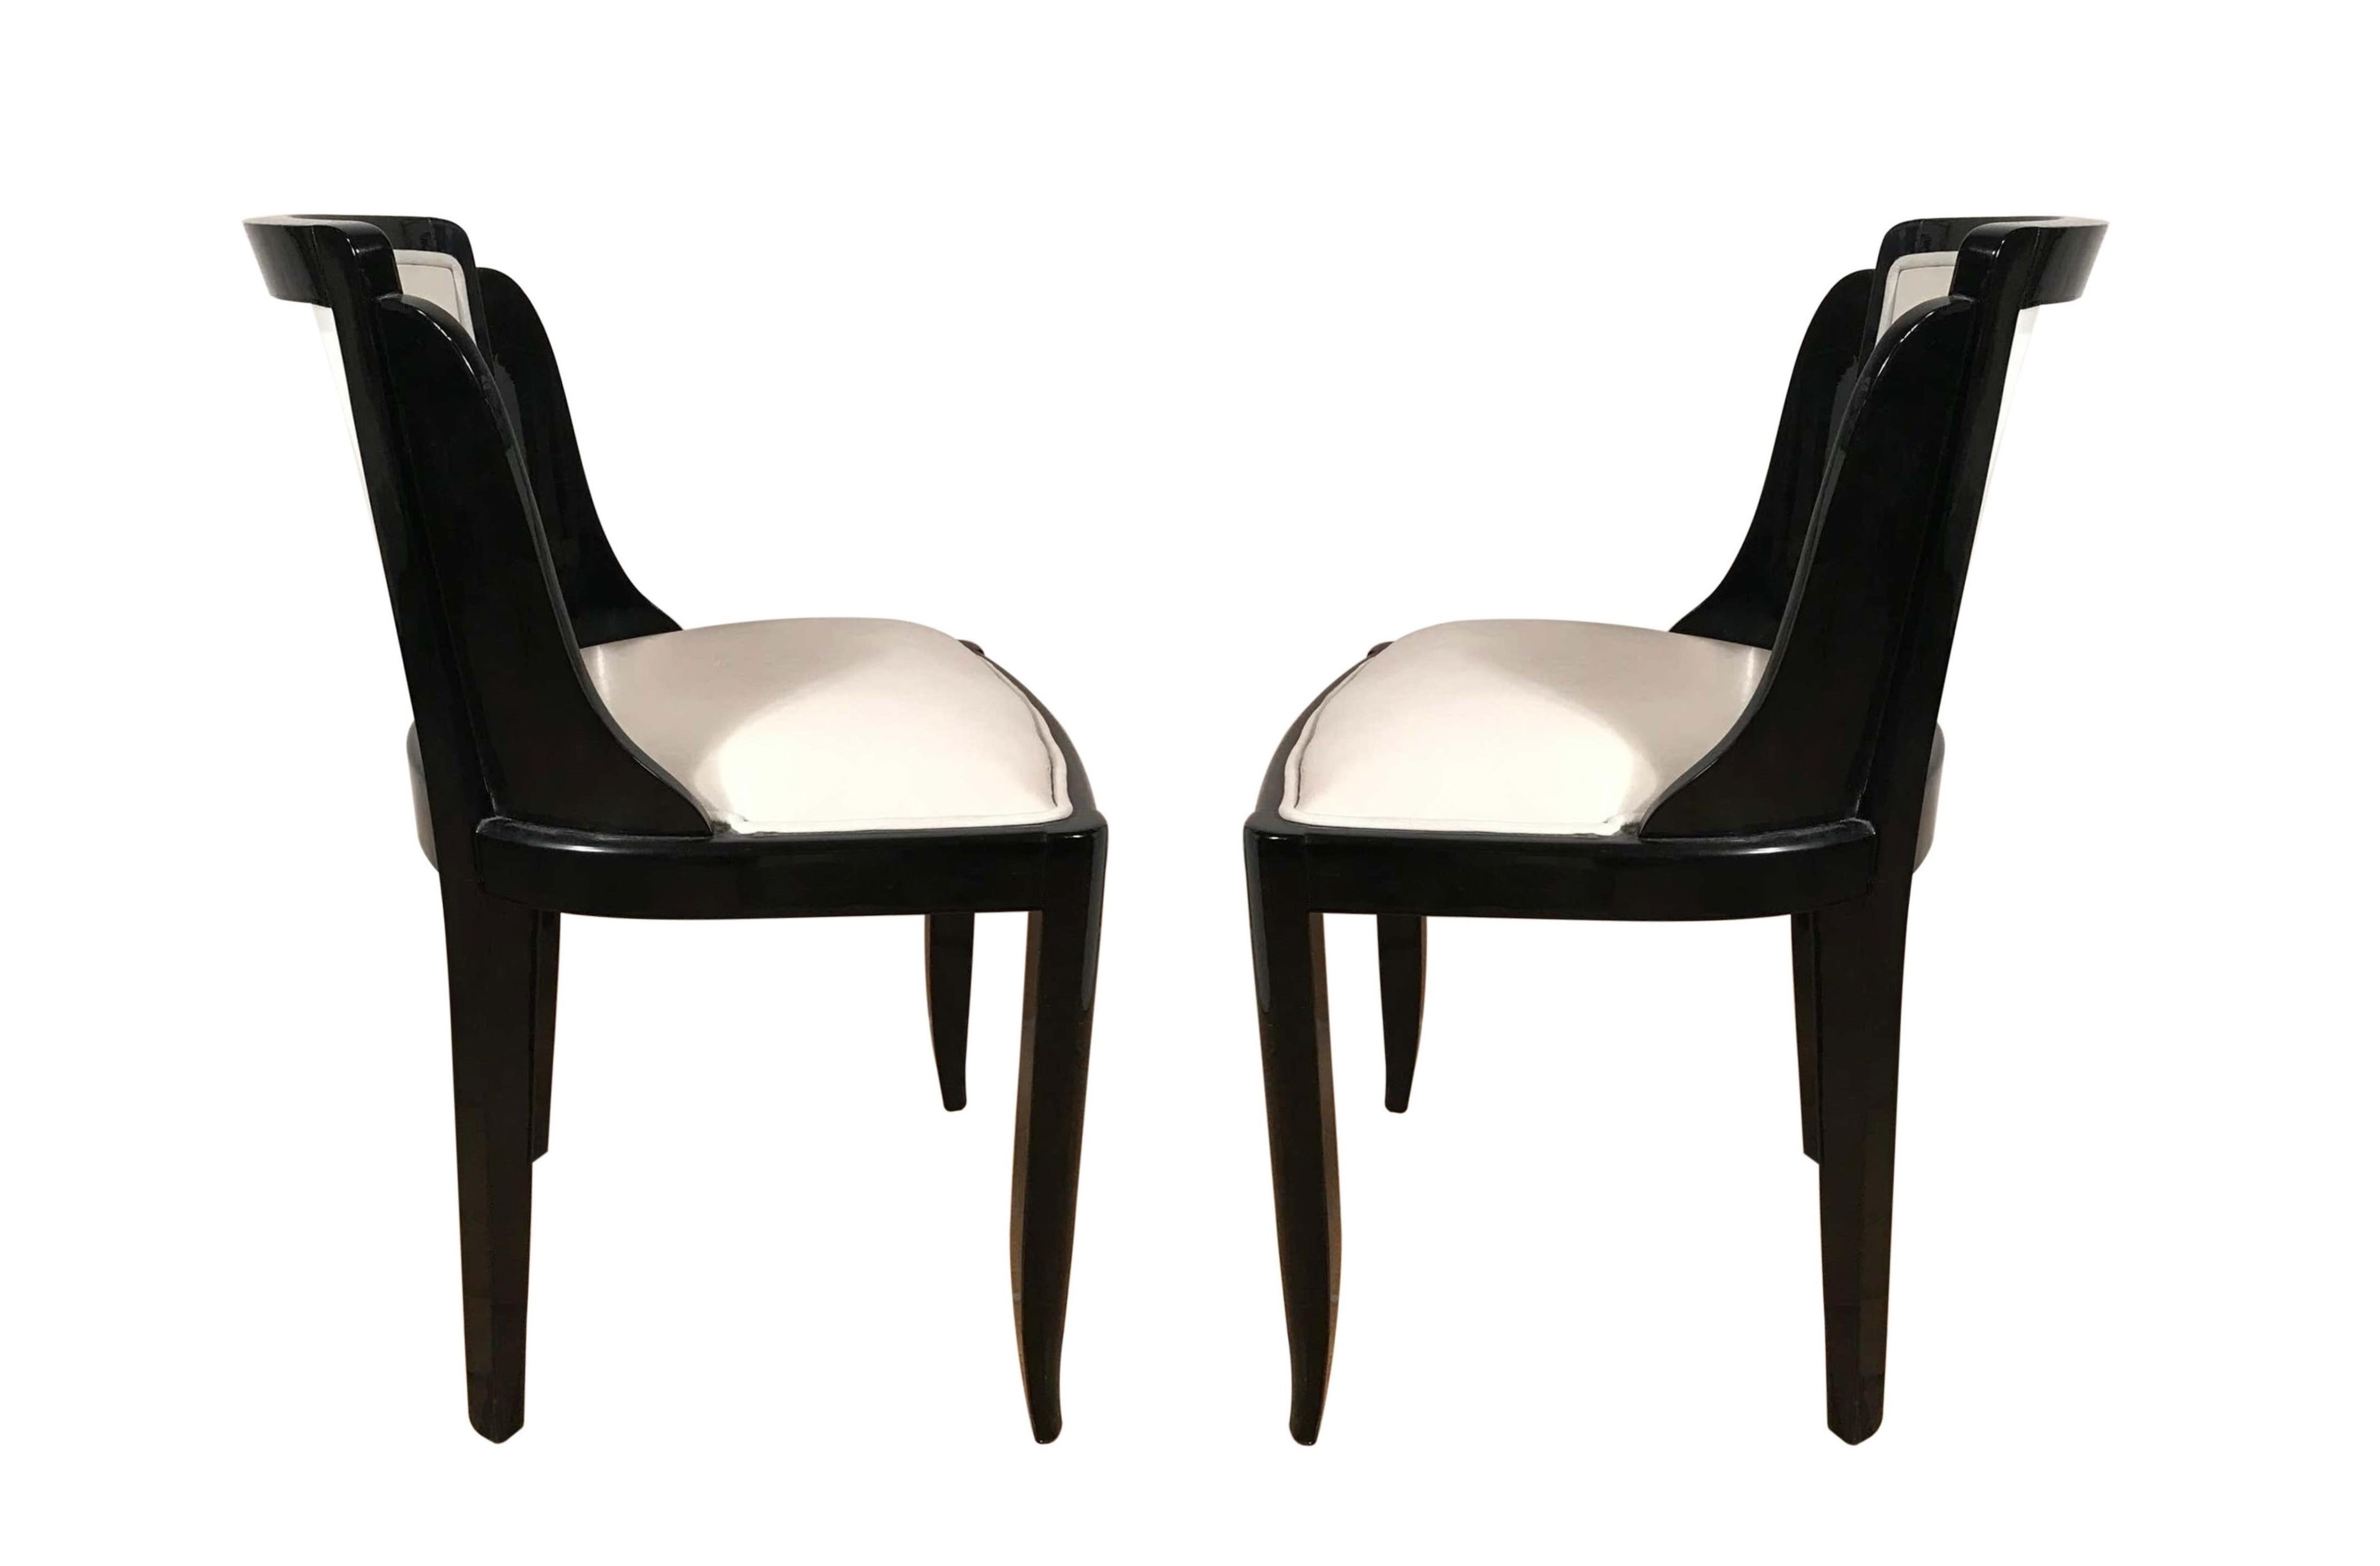 Eight Art Déco White Leather & Black Lacquered Chairs, circa 1920 In Excellent Condition For Sale In Dallas, TX